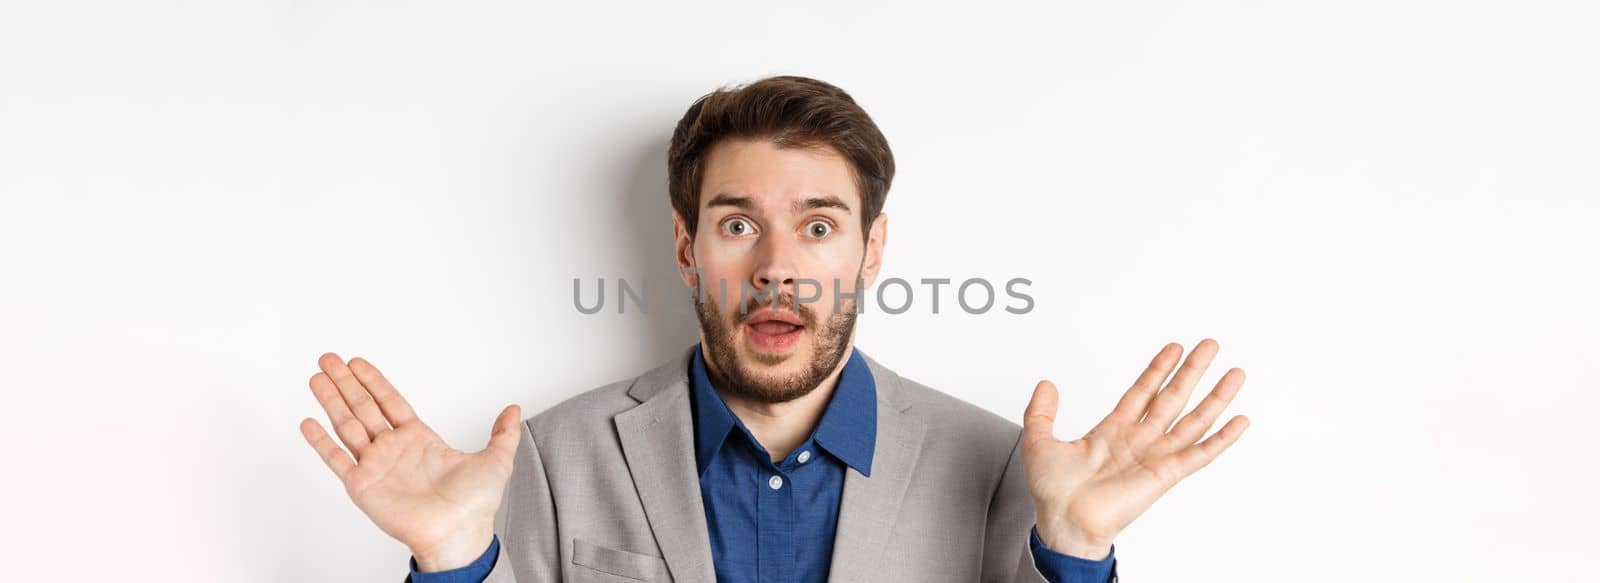 Surprised business man in suit spread hands sideways, looking confused and startled, white background.